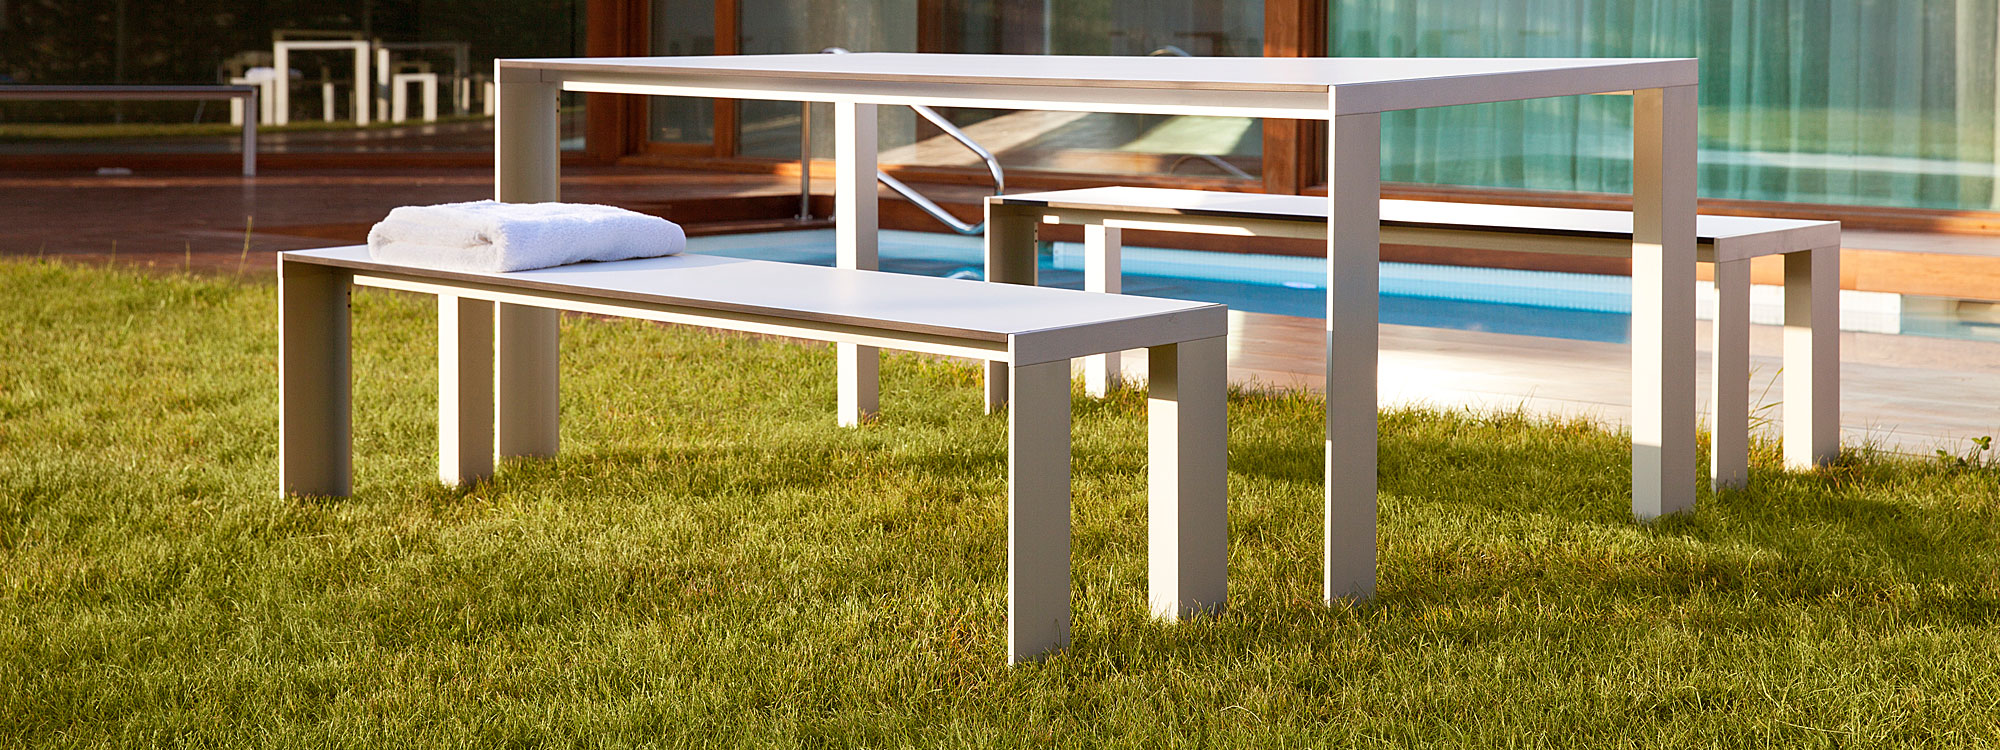 Image of Stua Deneb minimalist white garden table and benches with white HPL surfaces, shown in grassy lawn with swimming pool and building in the background